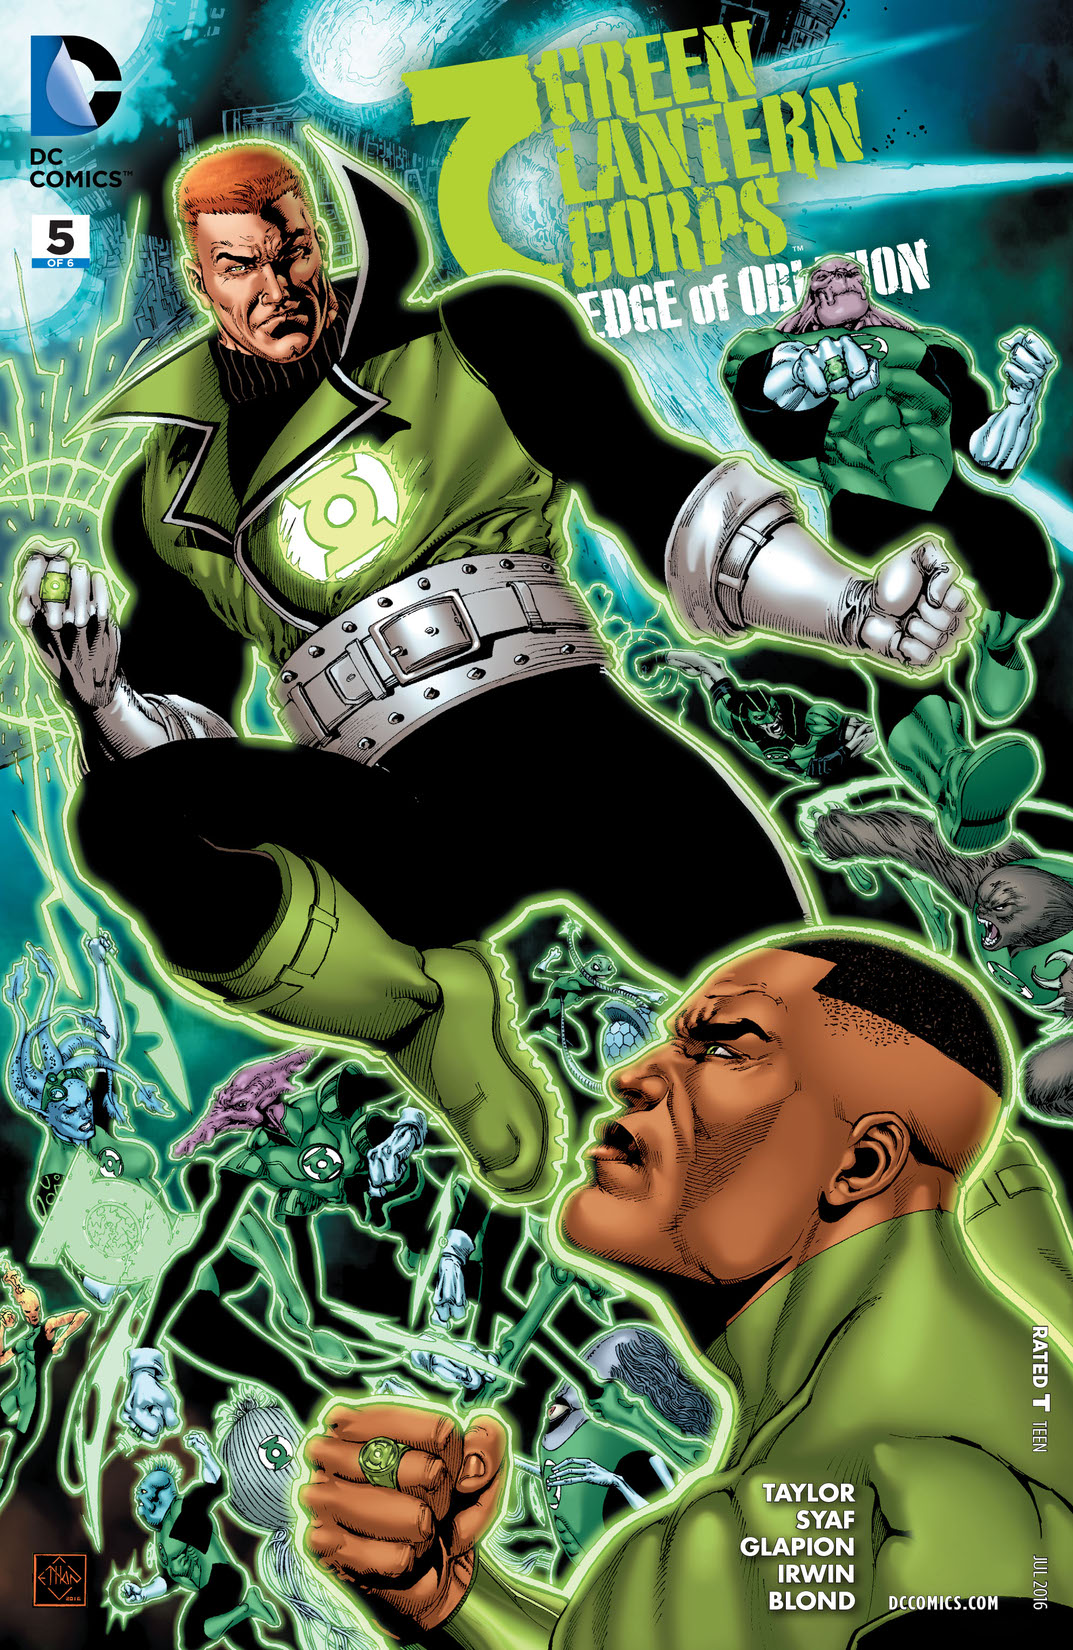 Green Lantern Corps: Edge of Oblivion #5 preview images